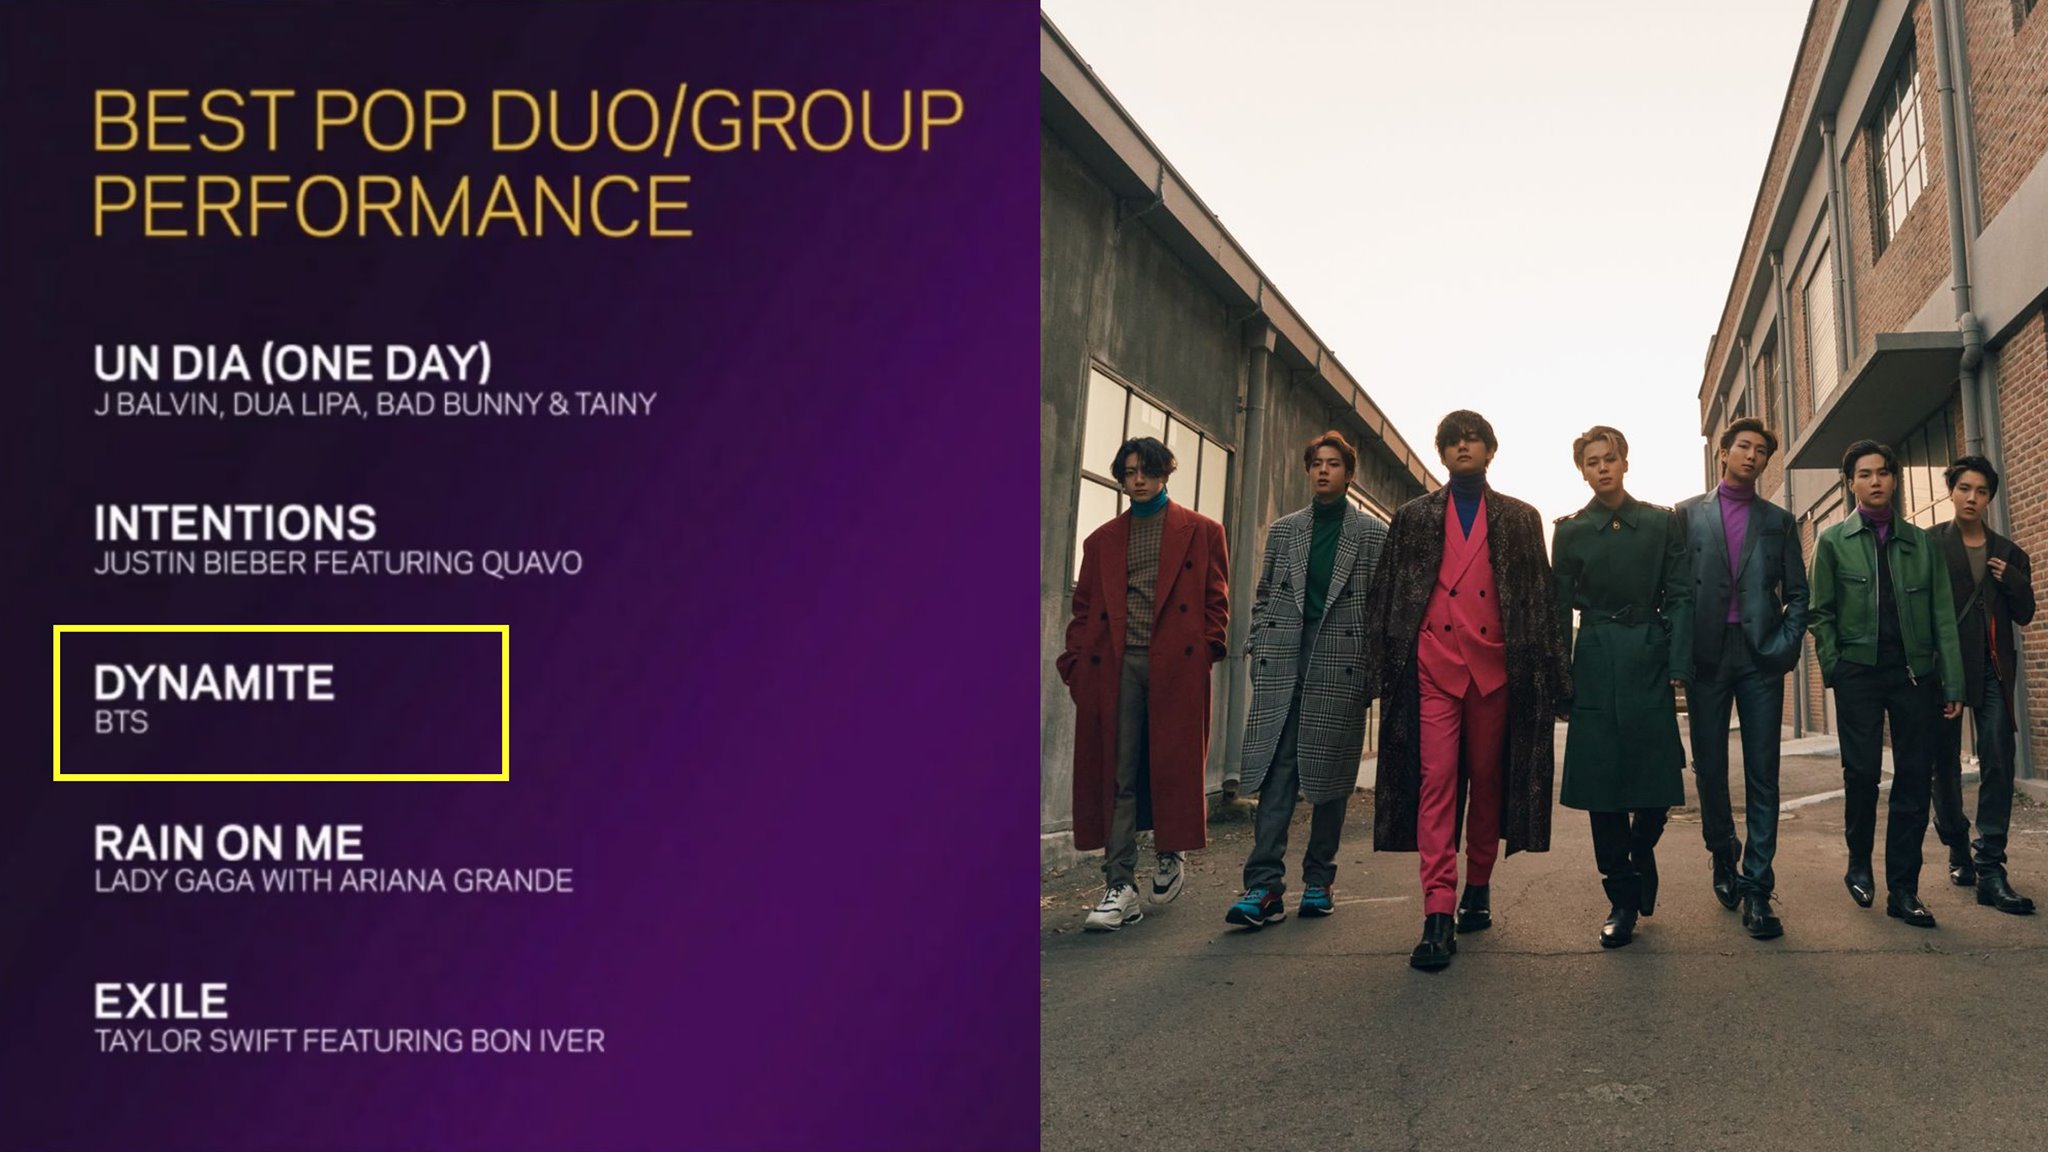 bts-officially-nominated-at-grammy-awards-for-best-pop-duo-group-performance